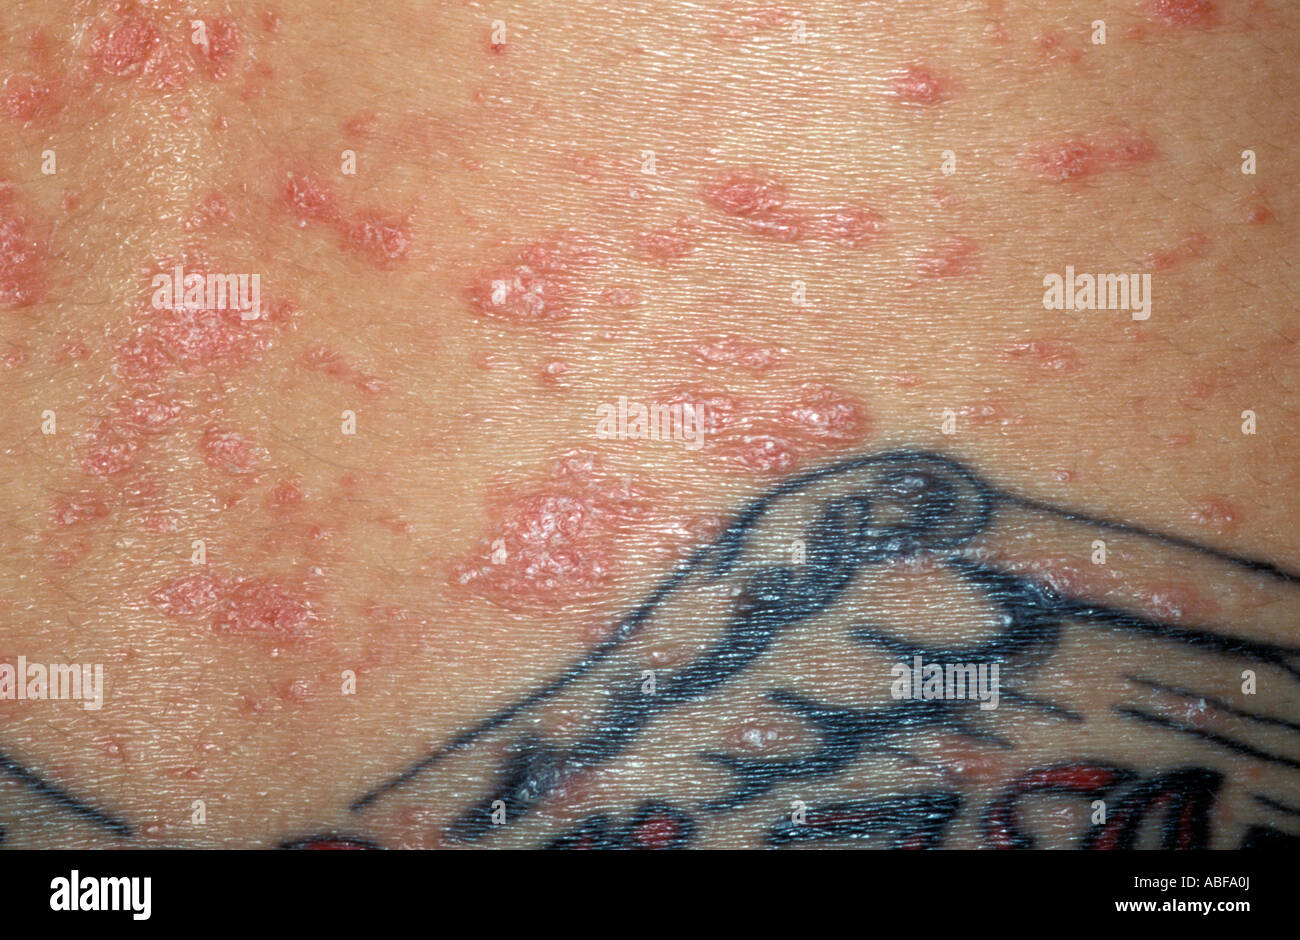 Guttate Psoriasis High Resolution Stock Photography and Images - Alamy